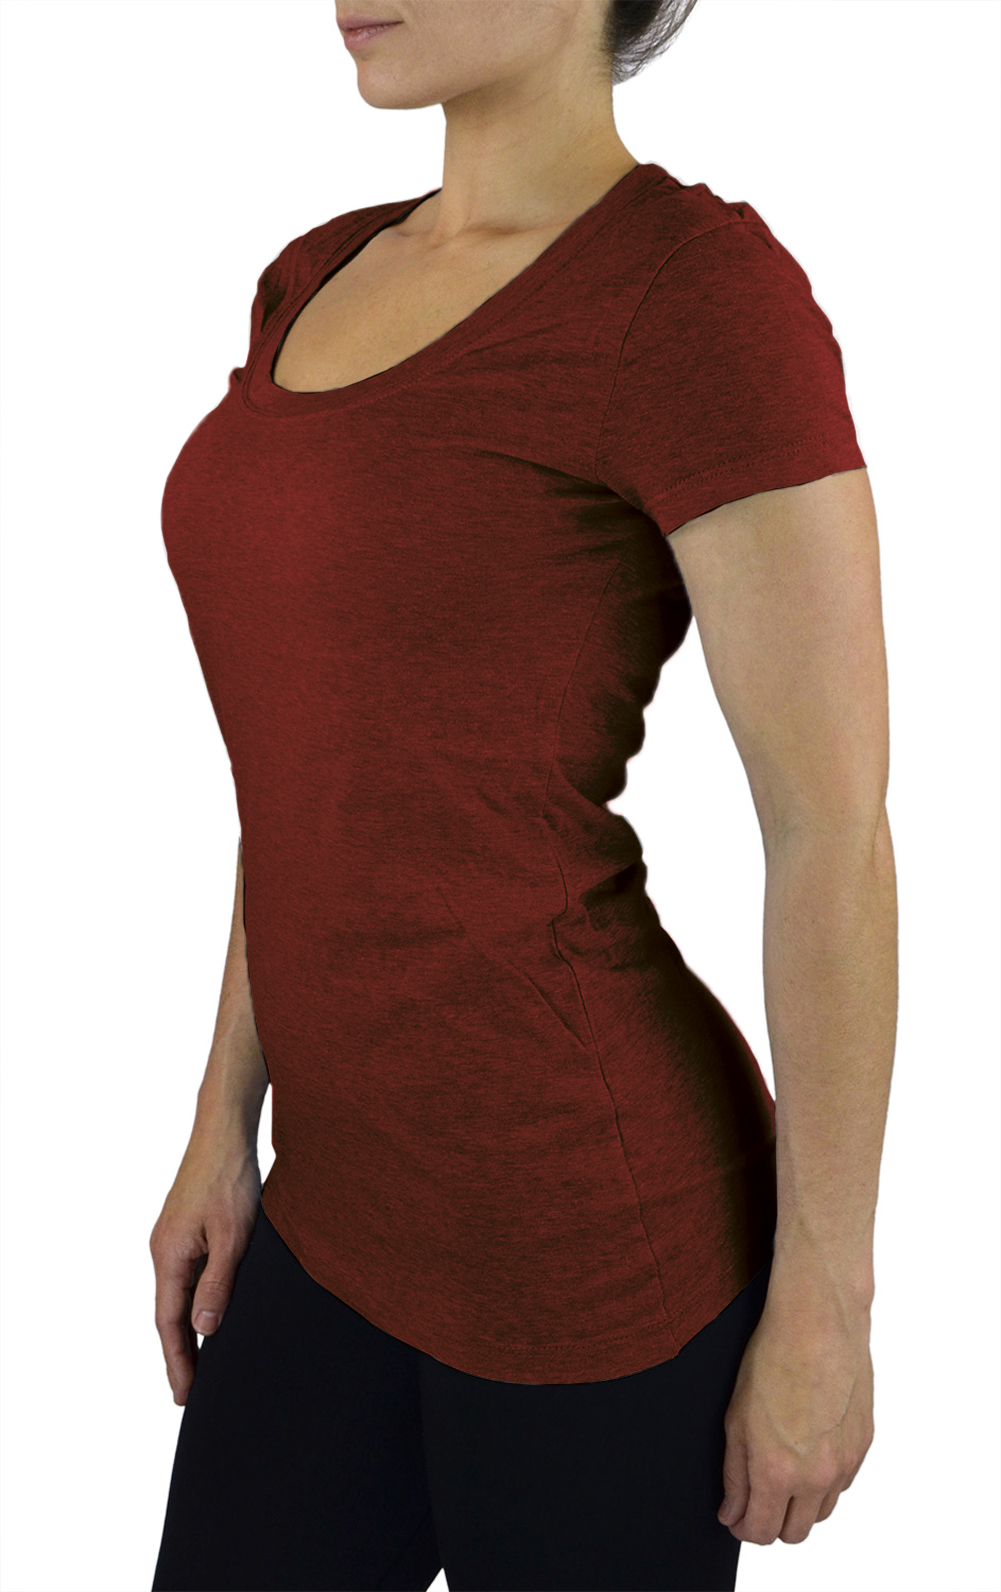 Belle Donne- Women's T Shirt Stretchy Scoop Neck Workout Yoga Cotton T-Shirt - Dark Rust Small